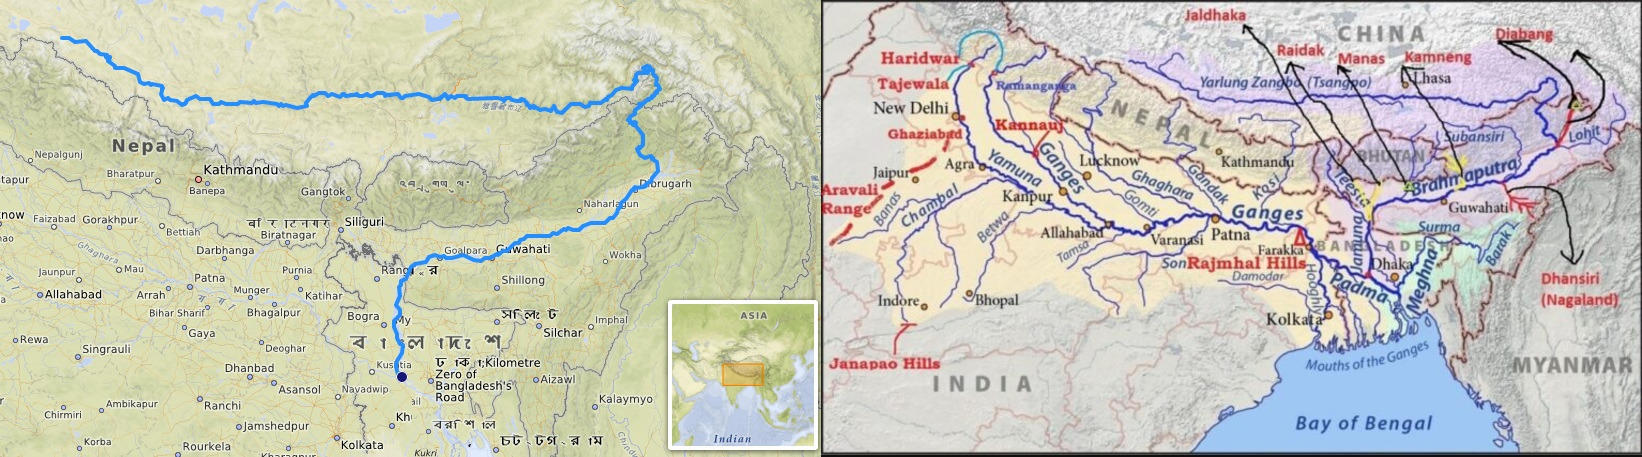 India's Upper Siang hydroelectric project, to counter China's dam on Brahmaputra_4.1